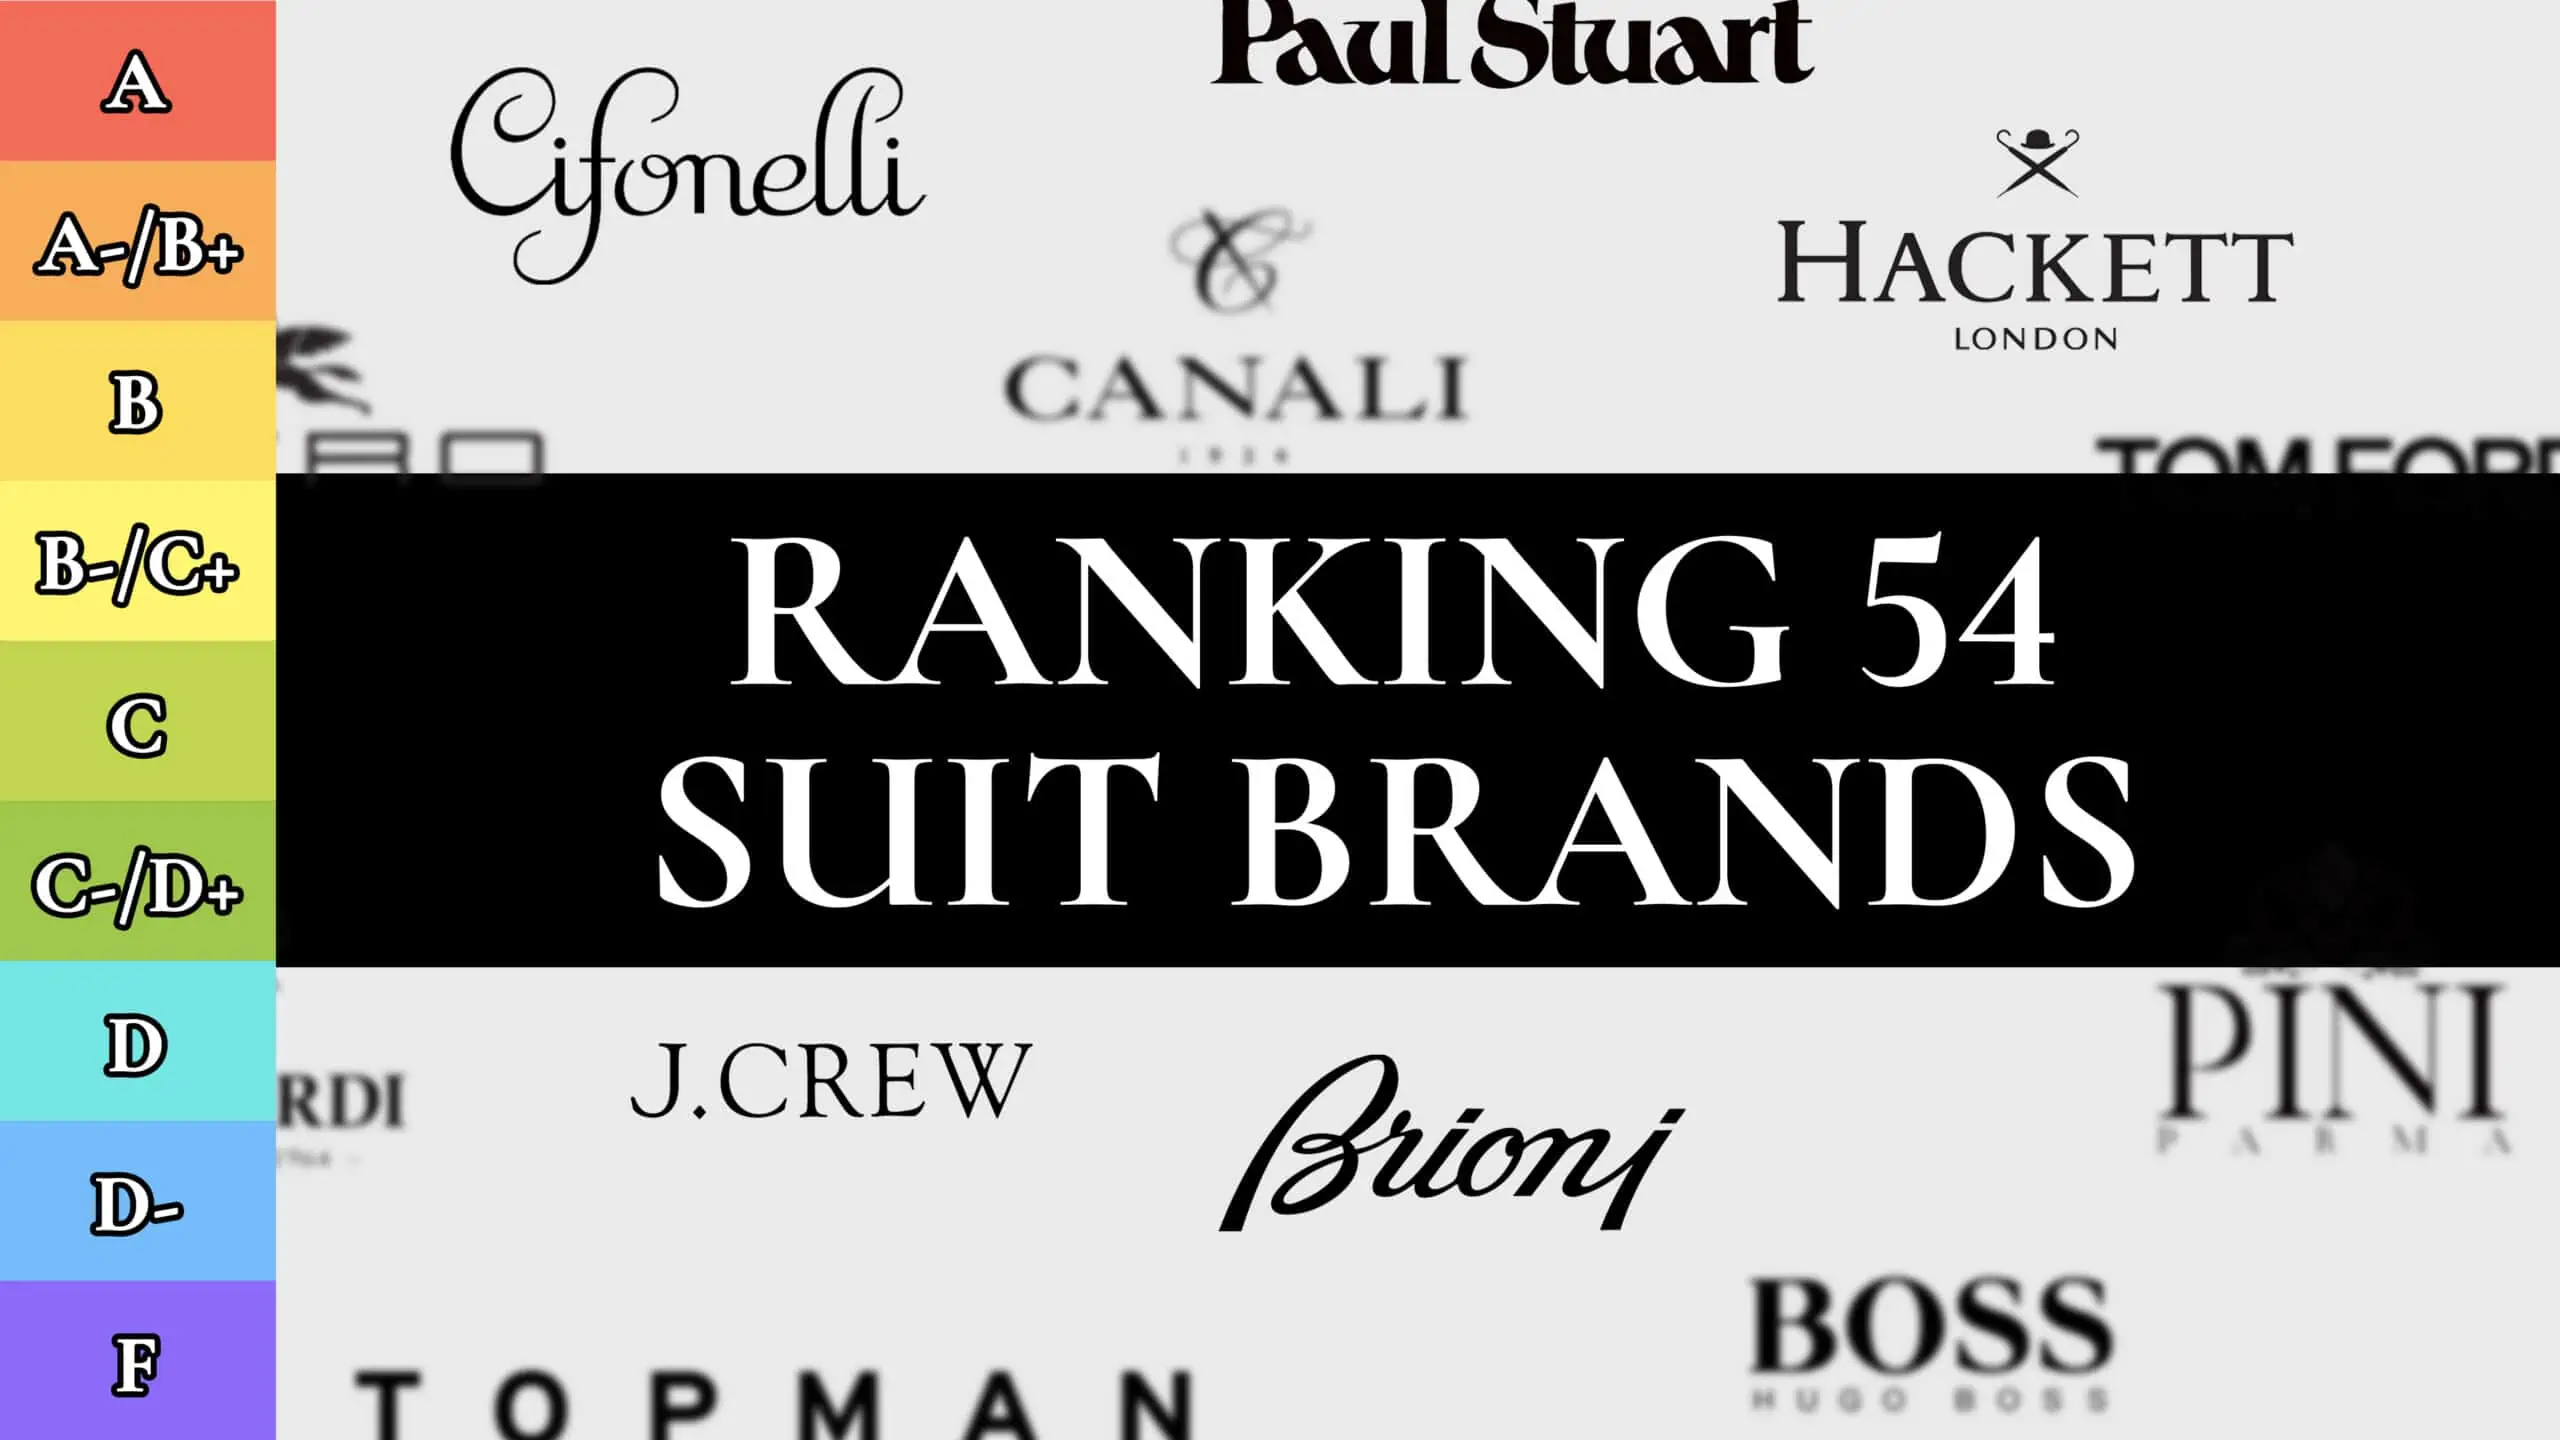 Ranking Men's RTW Suits (54 BEST and WORST Menswear Brands!)